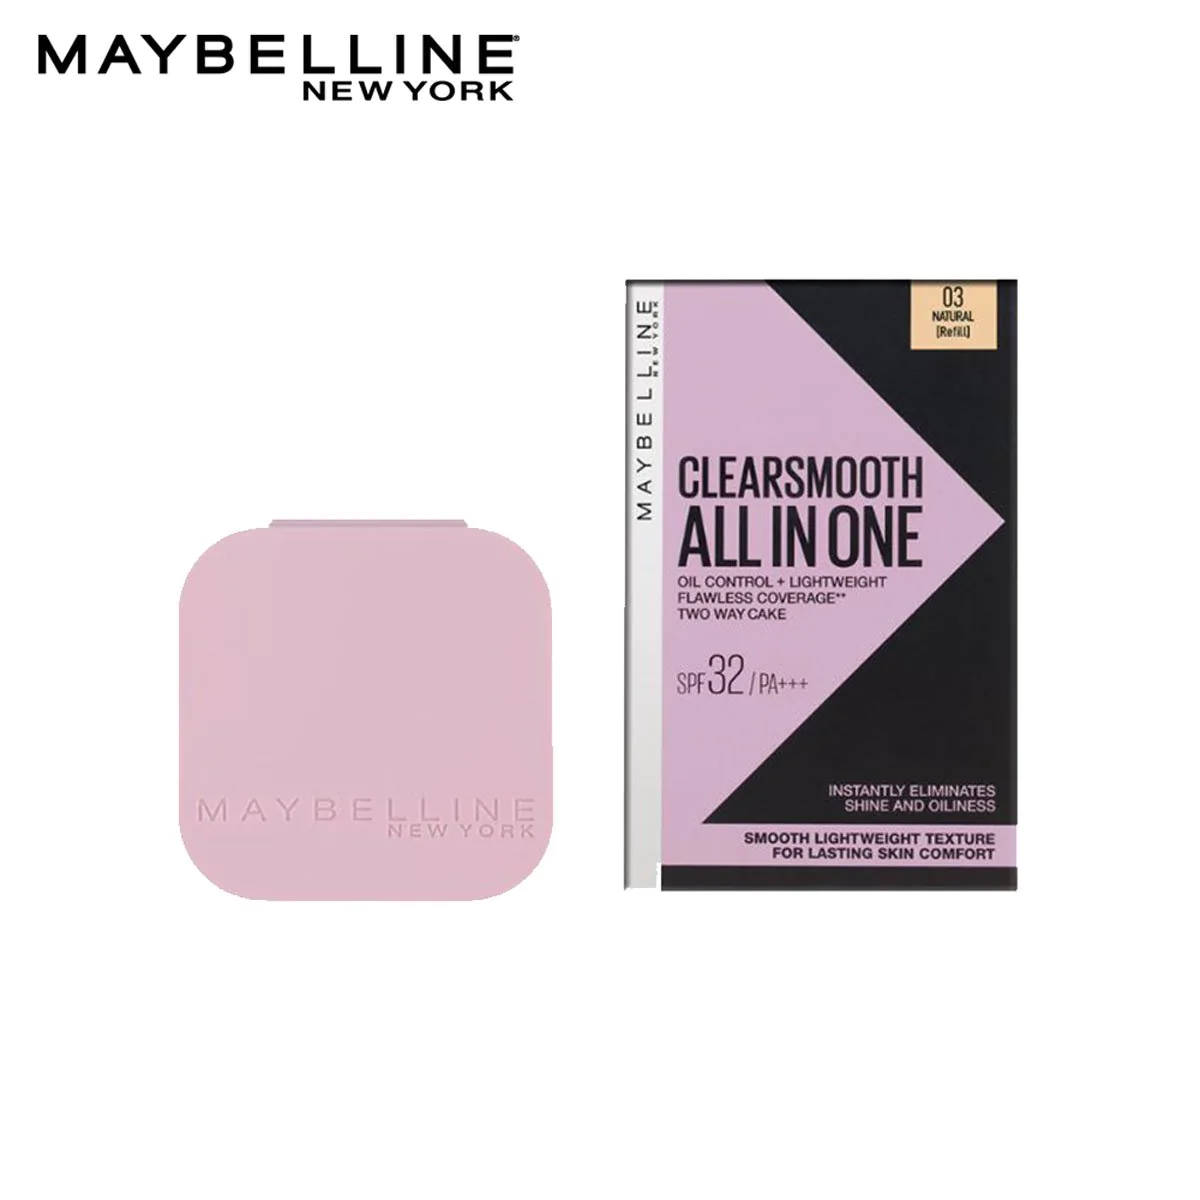 Maybelline New York Clear Smooth All In One Powder Foundation - 03 Natural